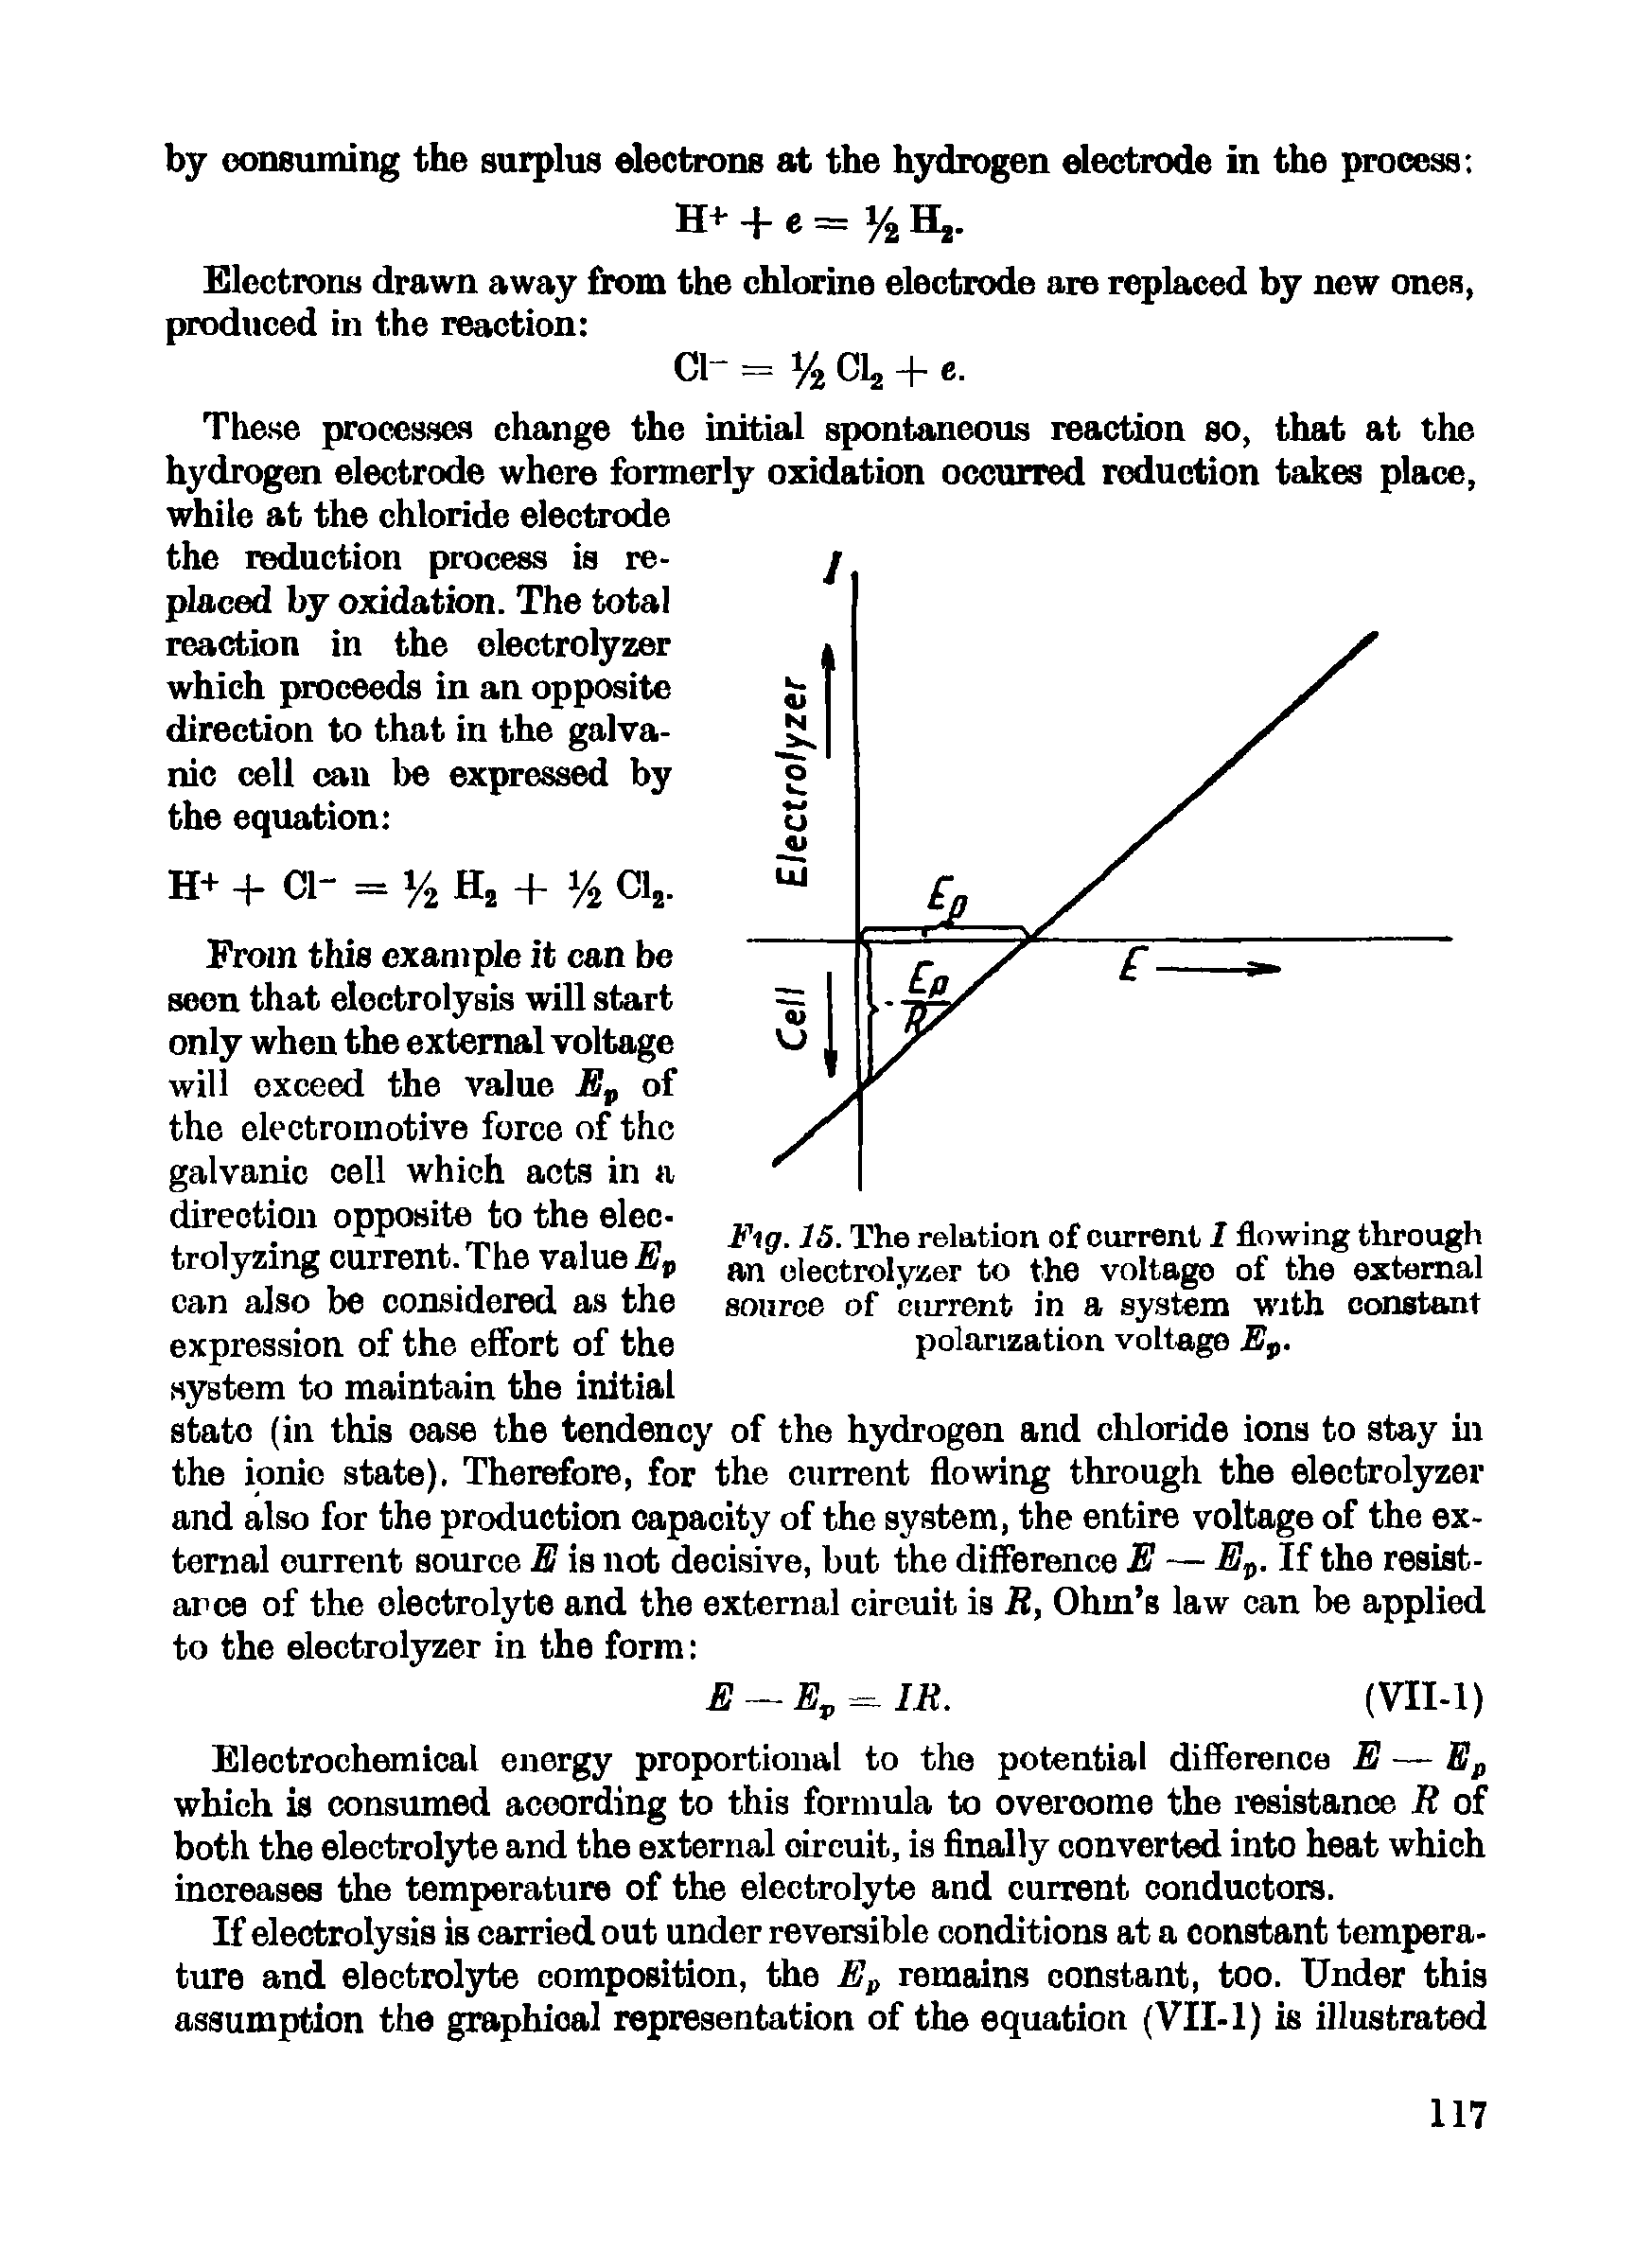 Fig. 15. The relation of current I flowing through an electrolyzer to the voltage of the external source of current in a system with constant polarization voltage Ep.